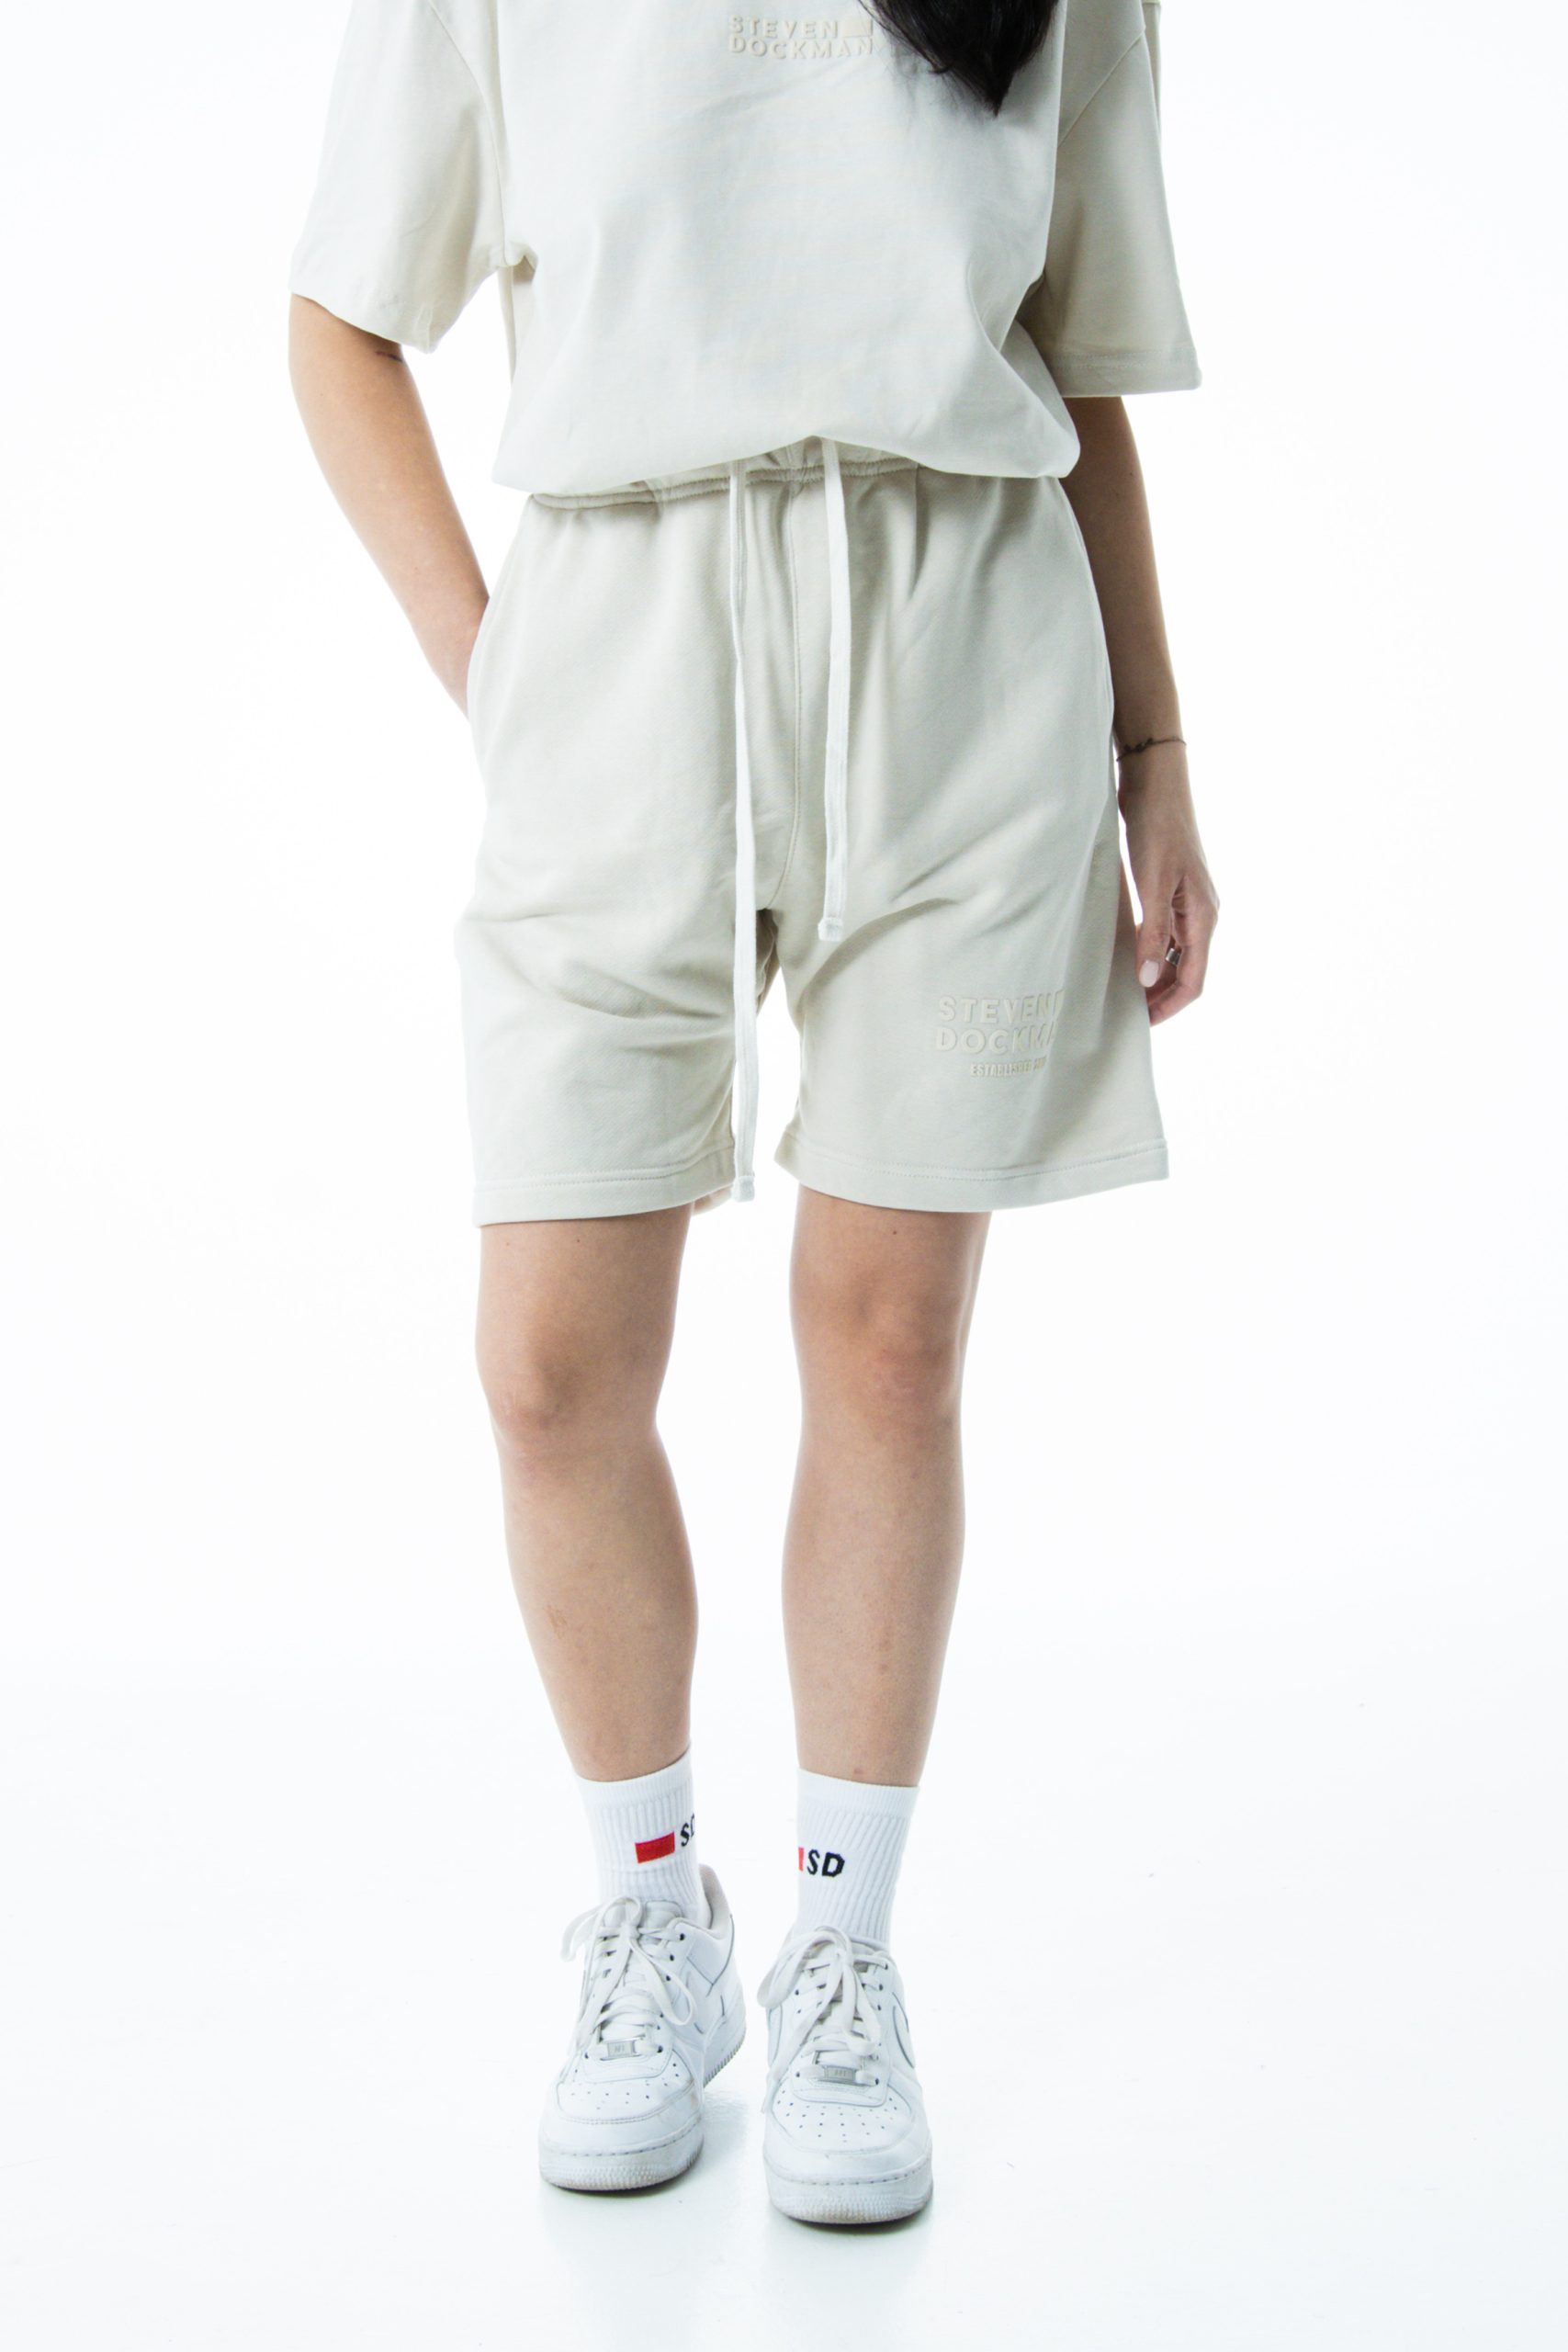 BAGGY SHORTS SAND